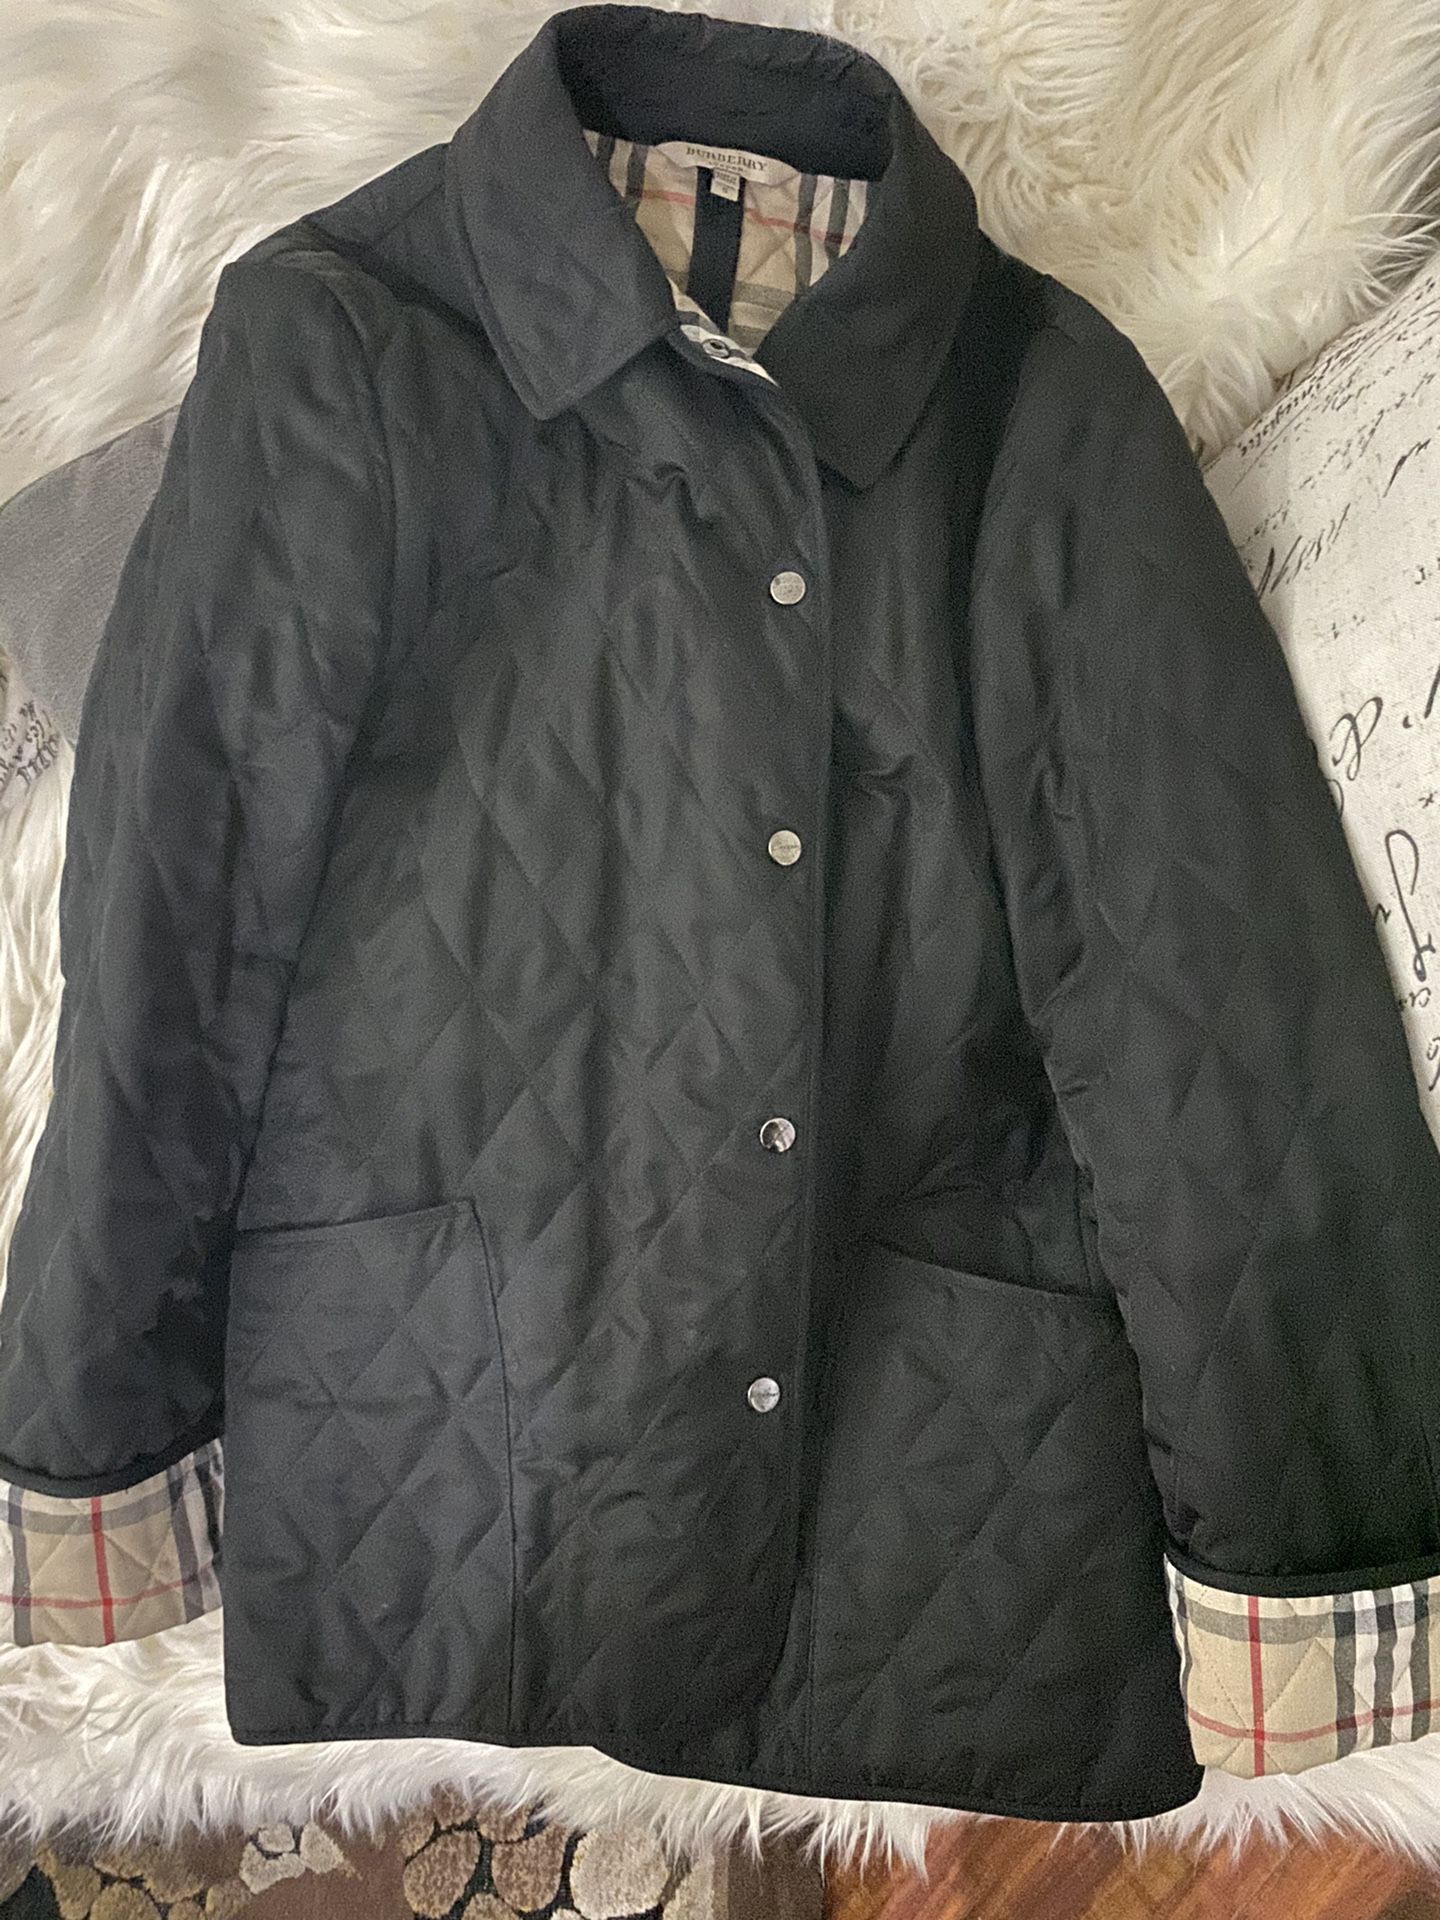 Real Burberry woman jacket size small